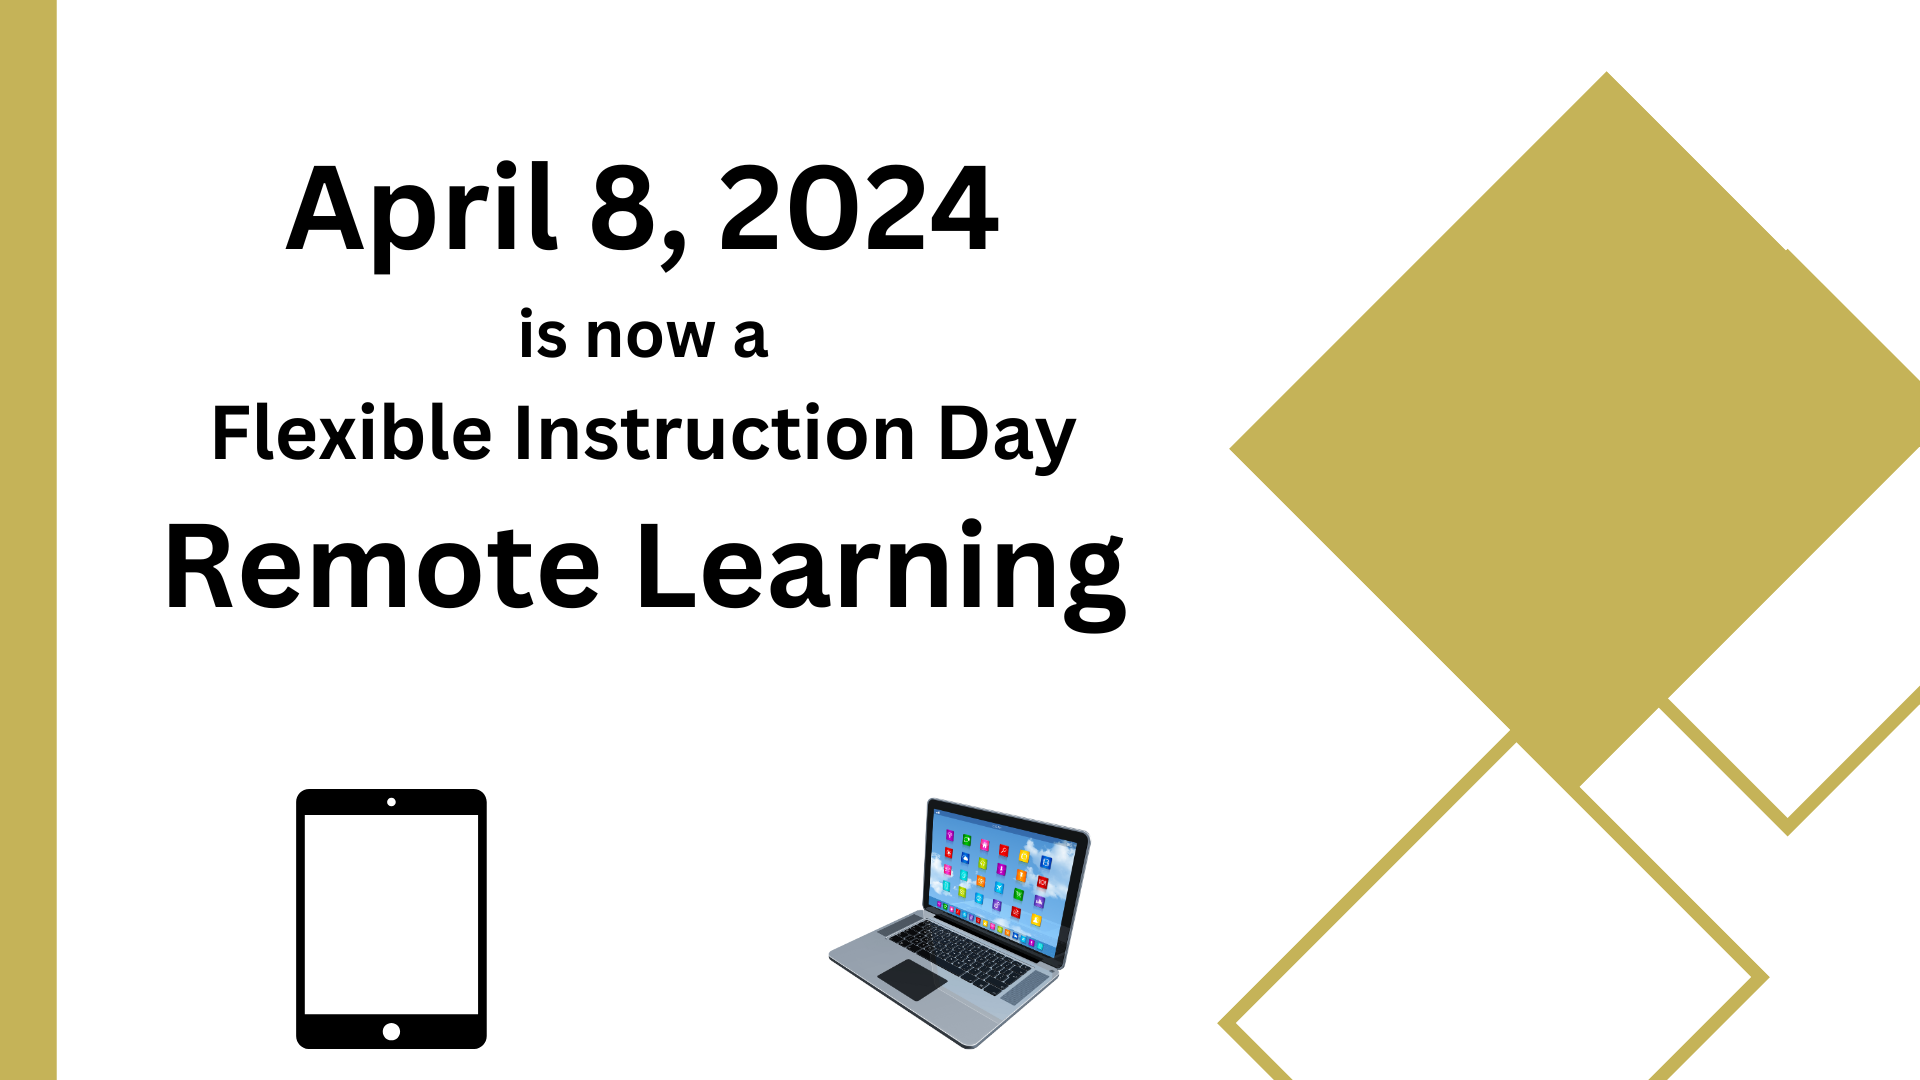 April 8 is now a Flexible Instruction Day